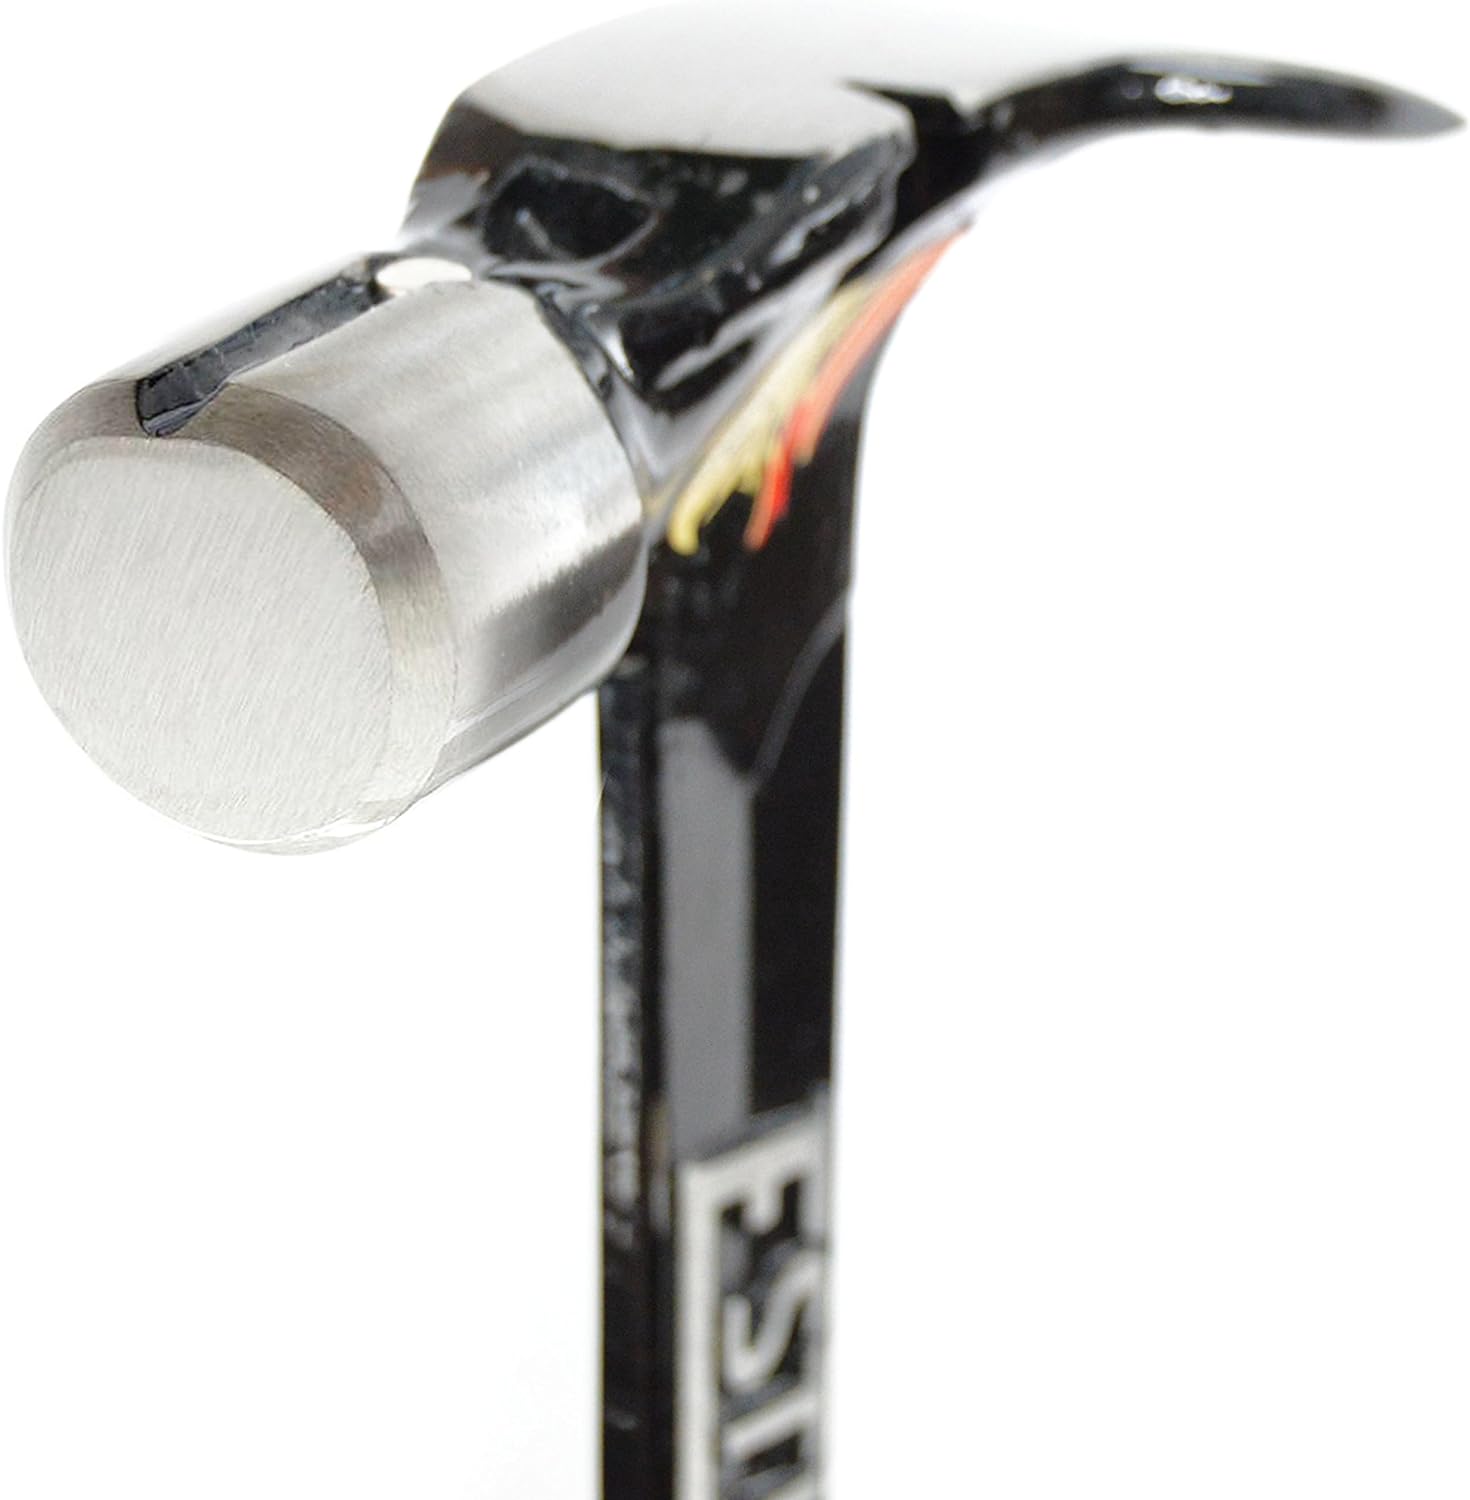 ESTWING Ultra Series Hammer - 15 oz Rip Claw Framer with Smooth Face